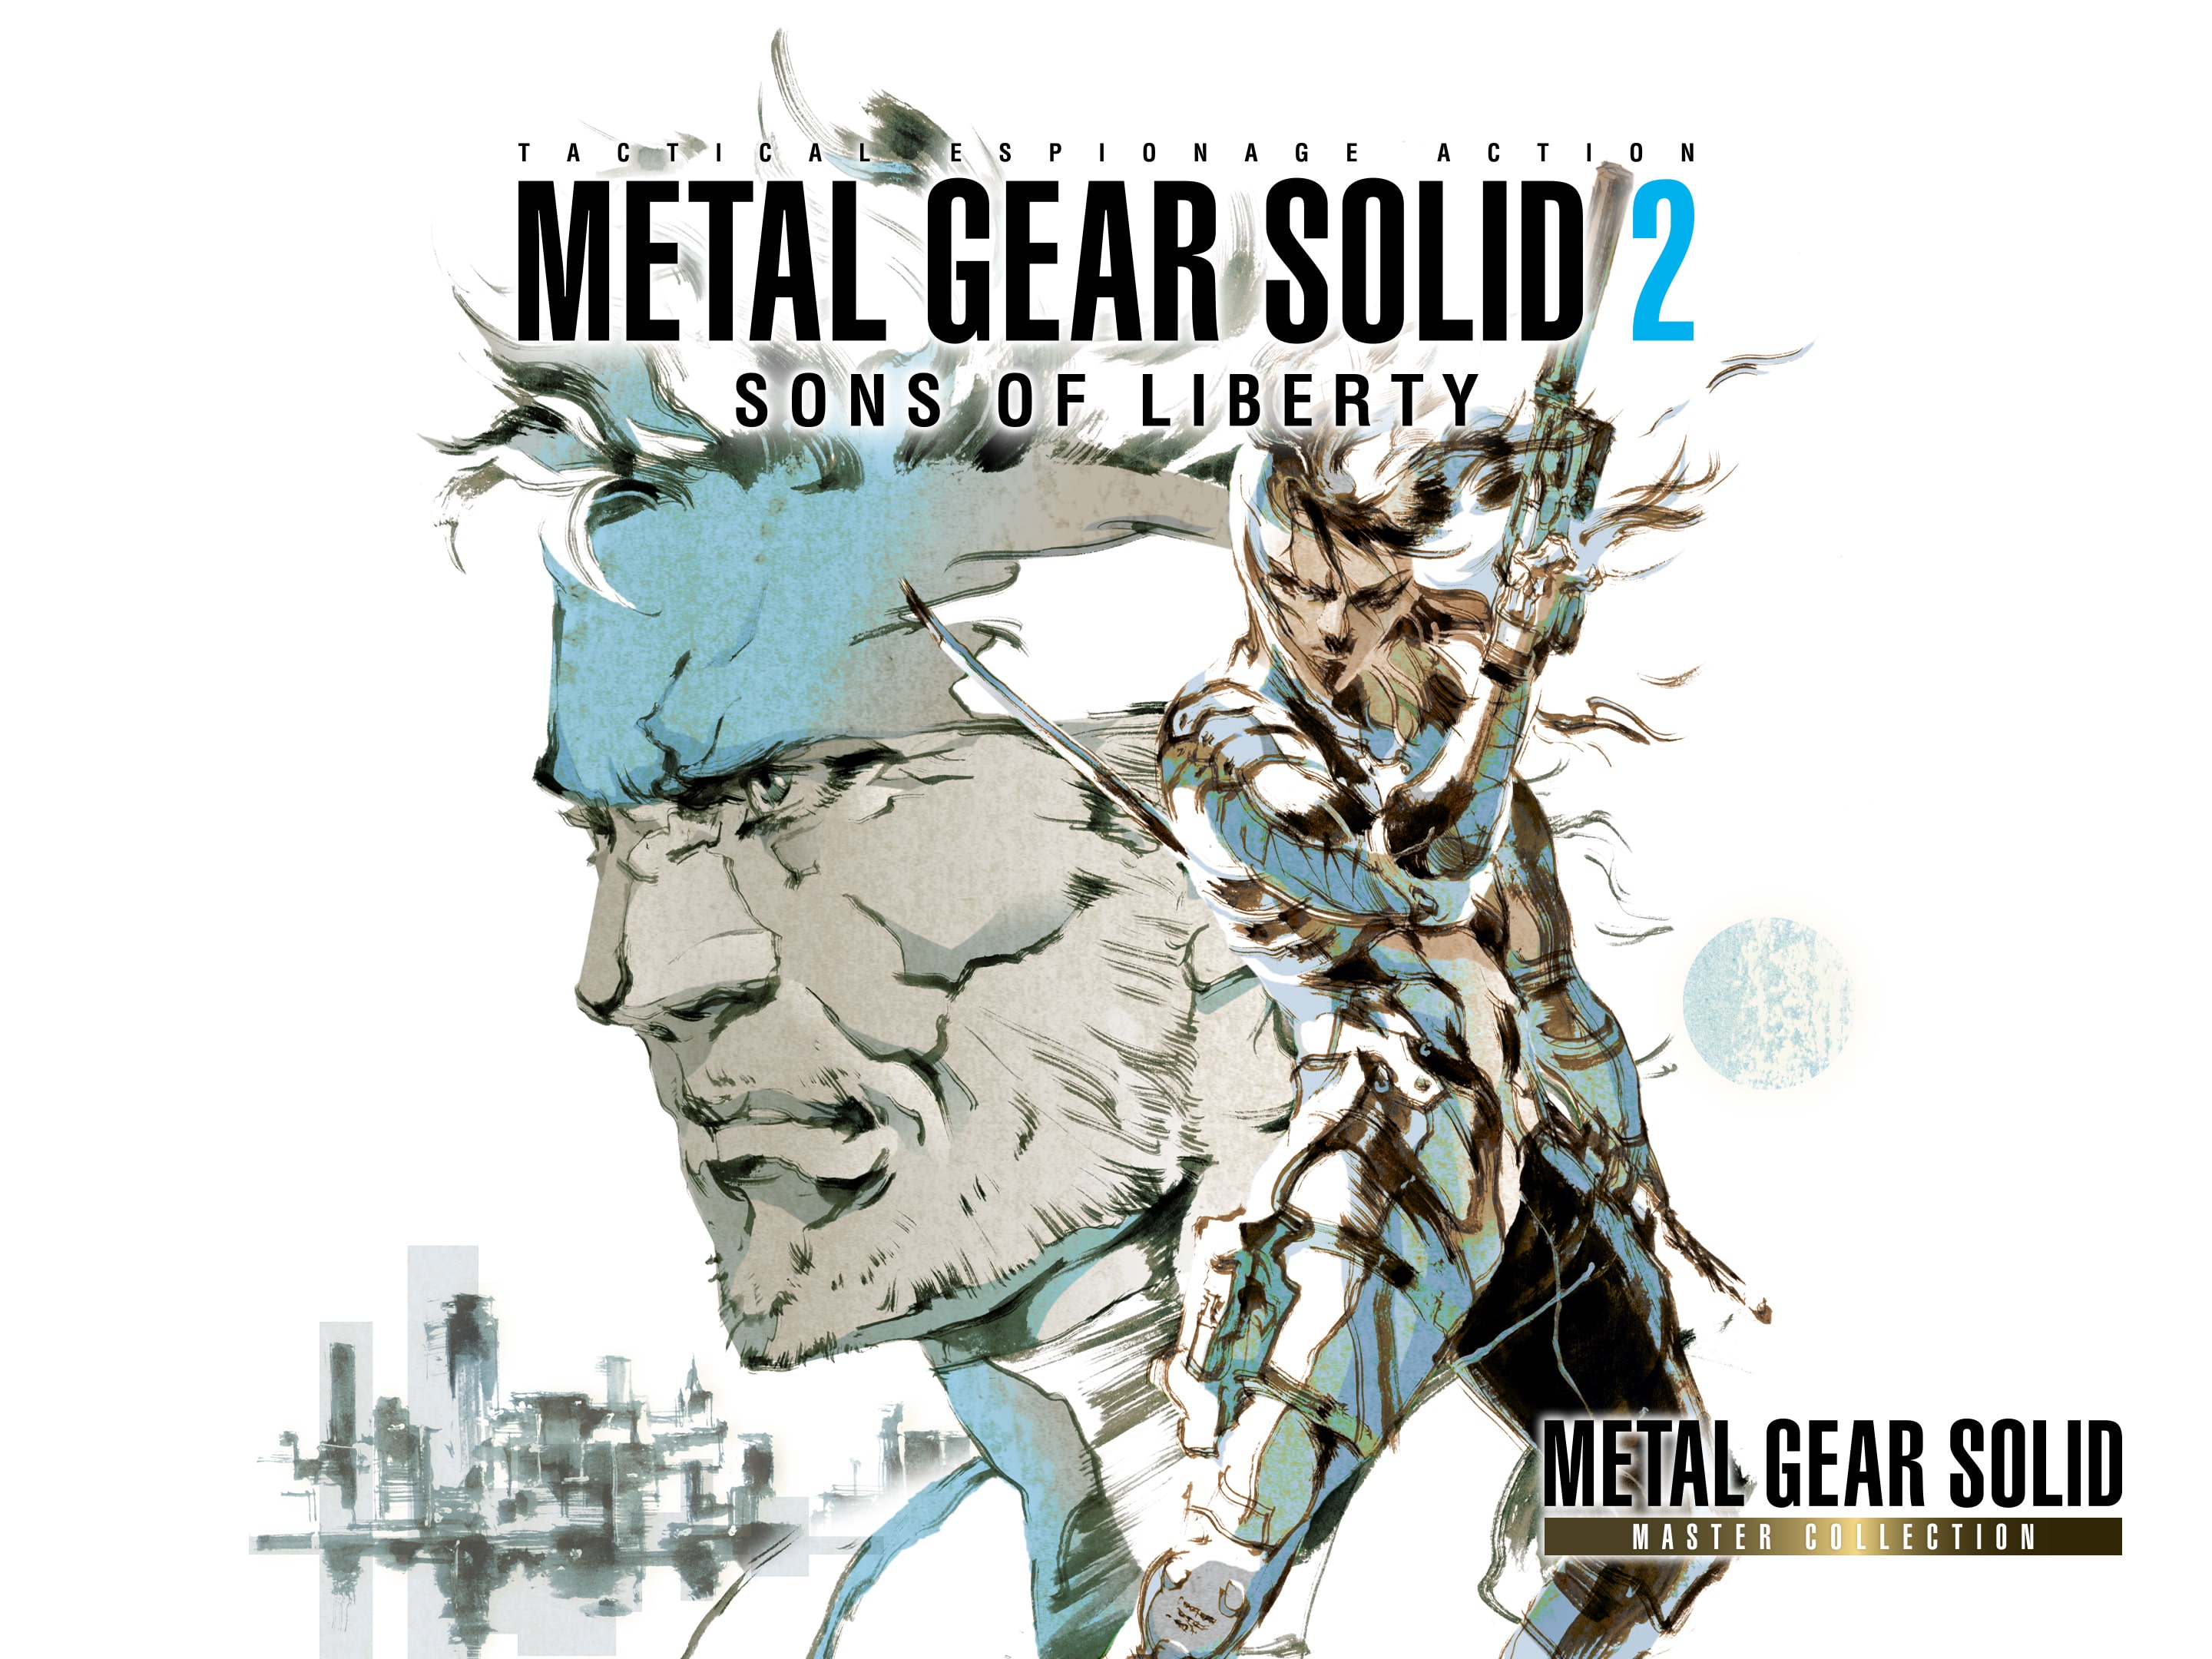 METAL GEAR SOLID: Vol.1 PS4 & COLLECTION PS5 MASTER